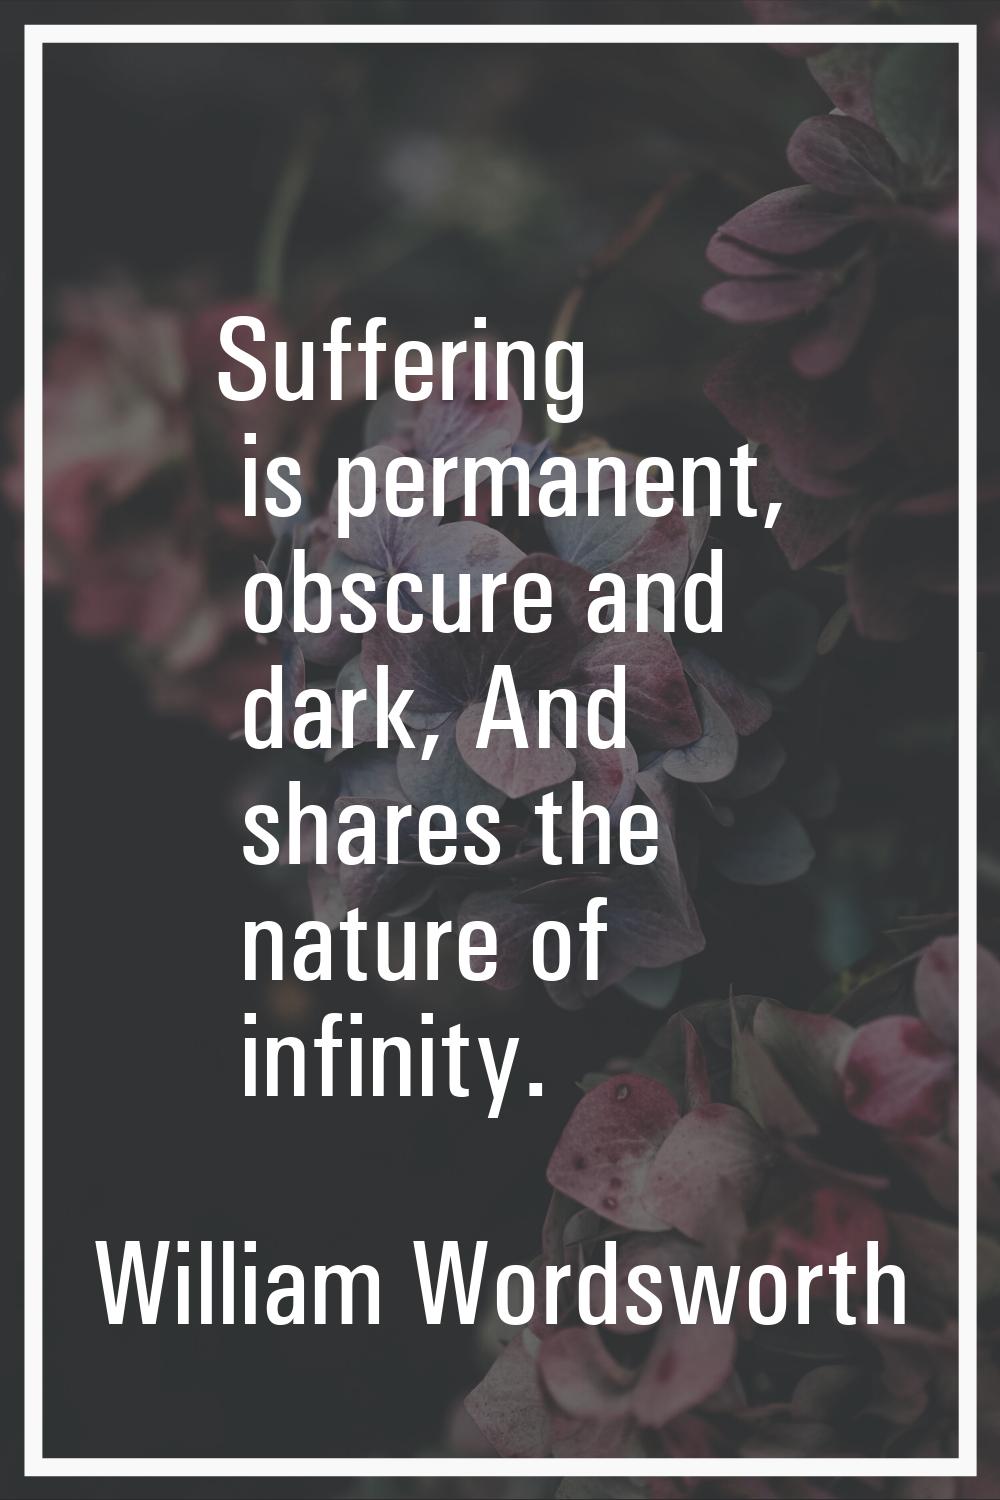 Suffering is permanent, obscure and dark, And shares the nature of infinity.